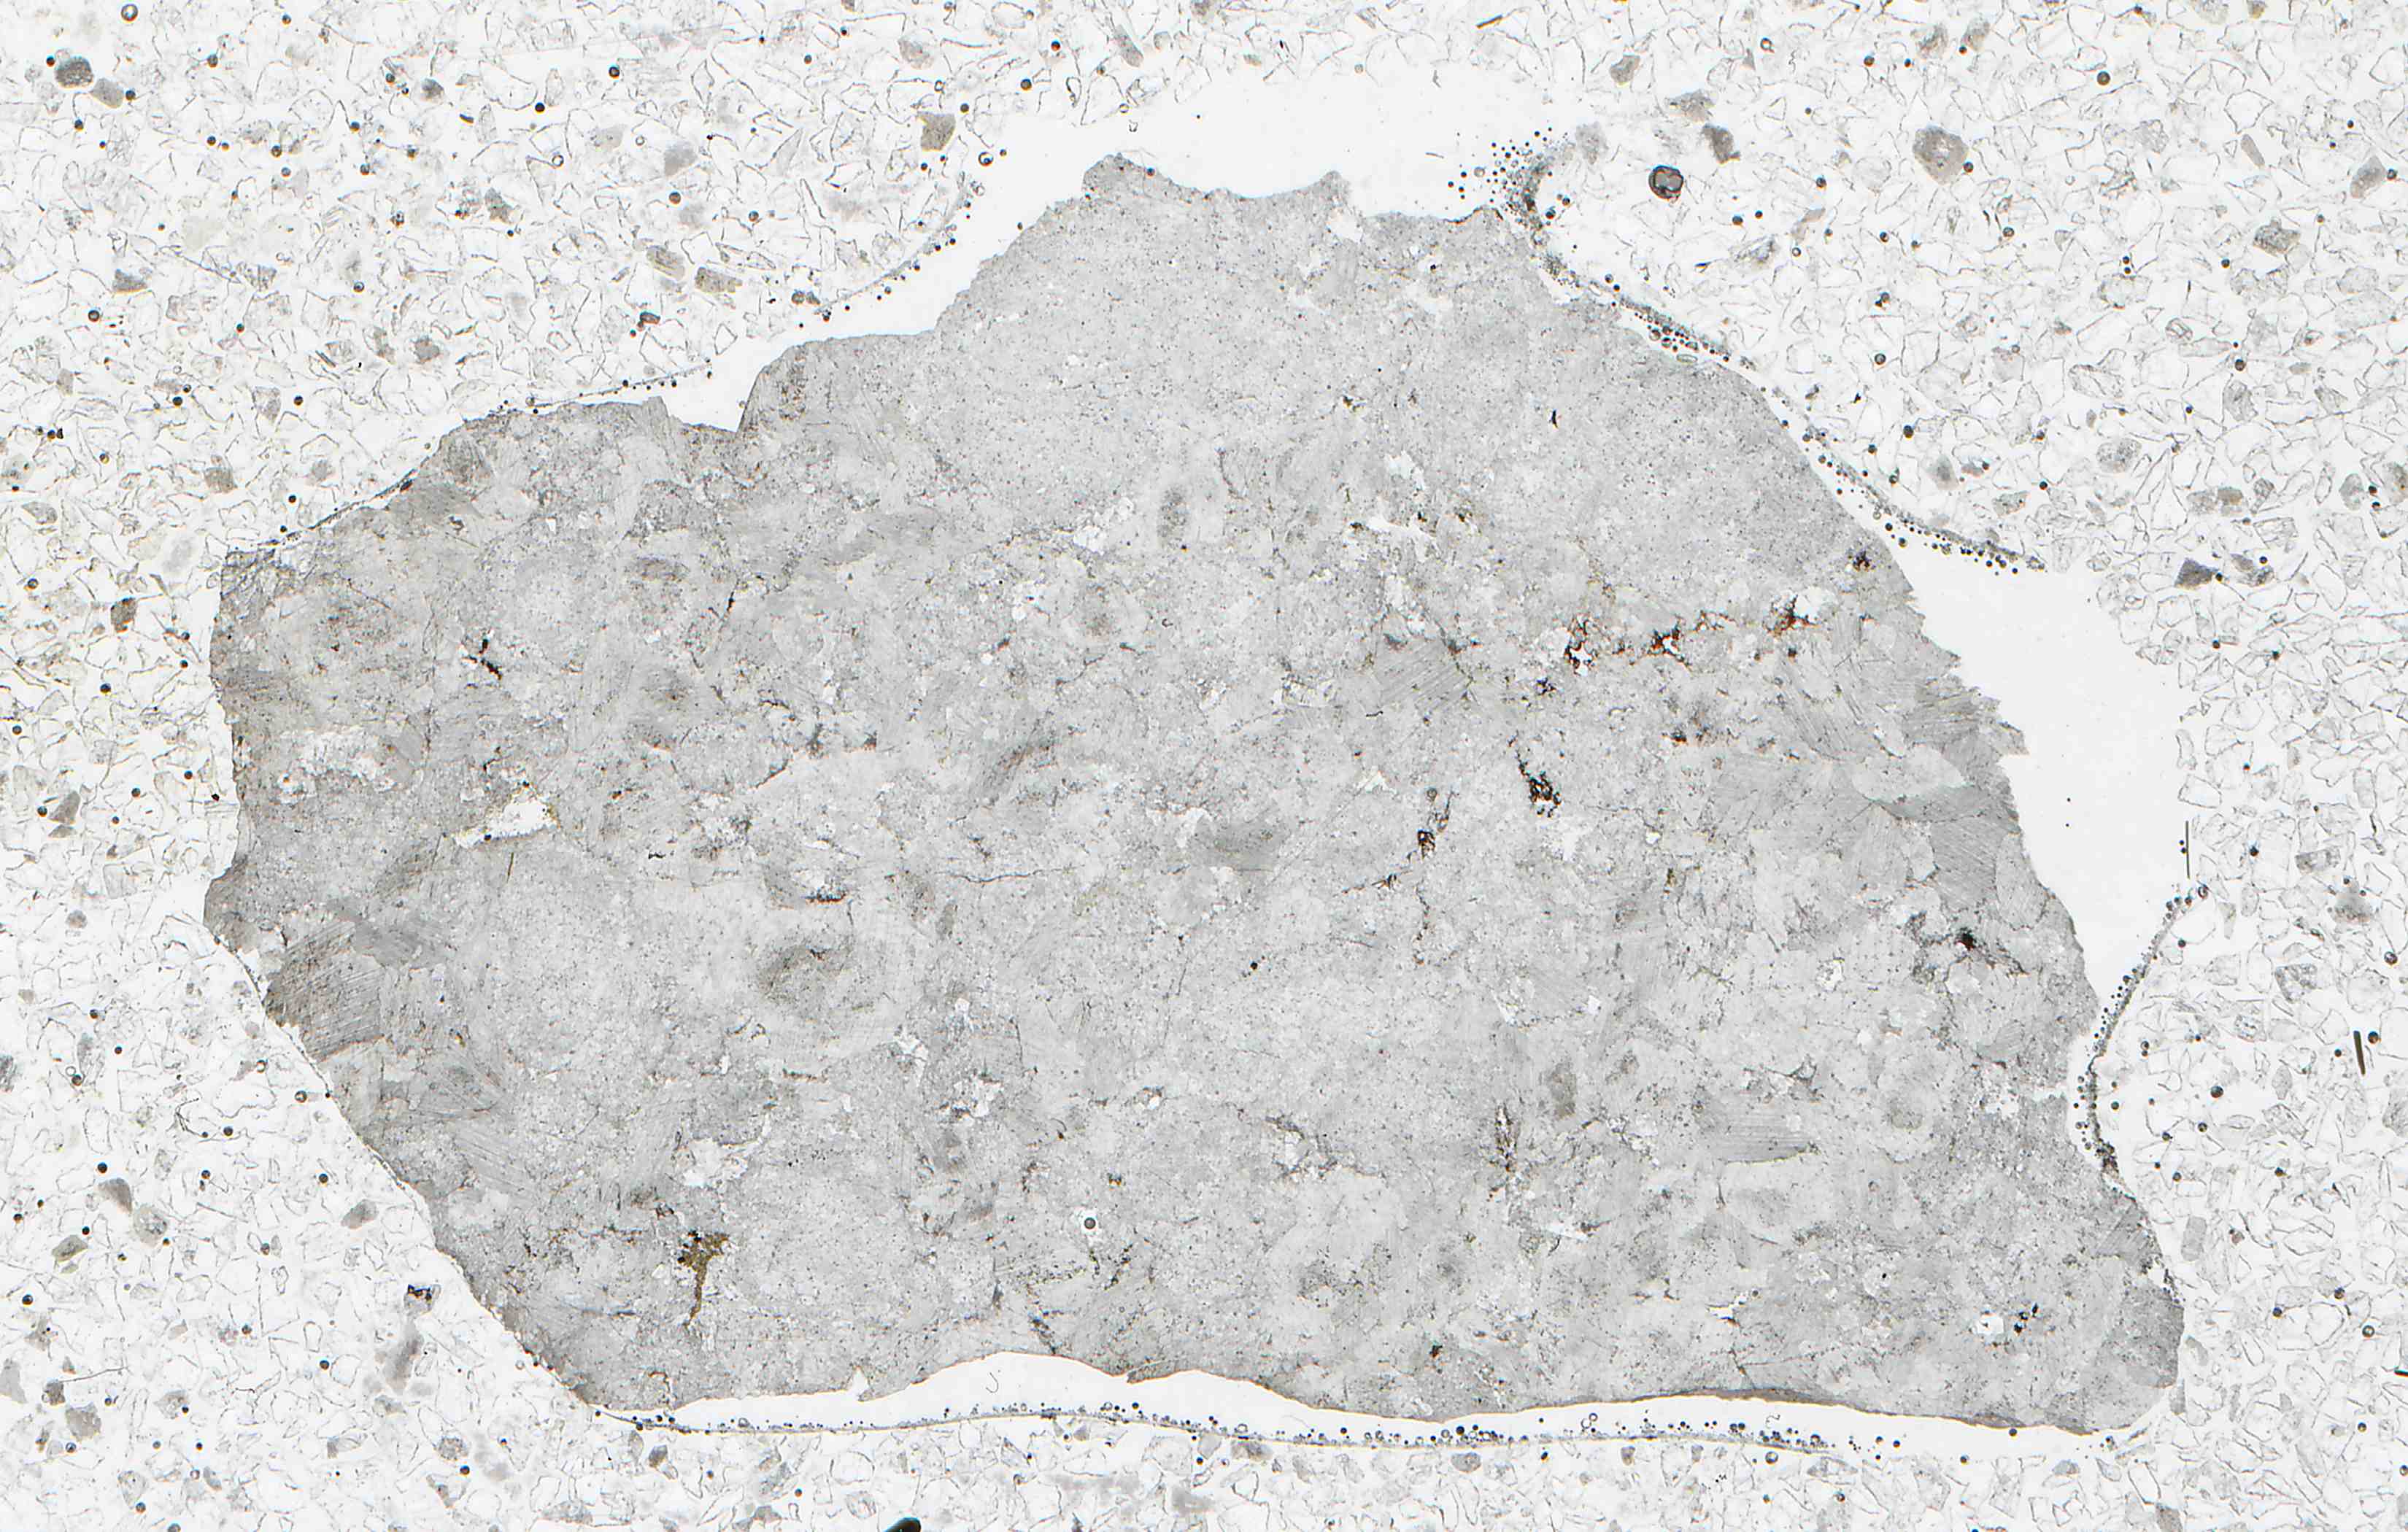 Mountain Pass California carbonatite in thin section